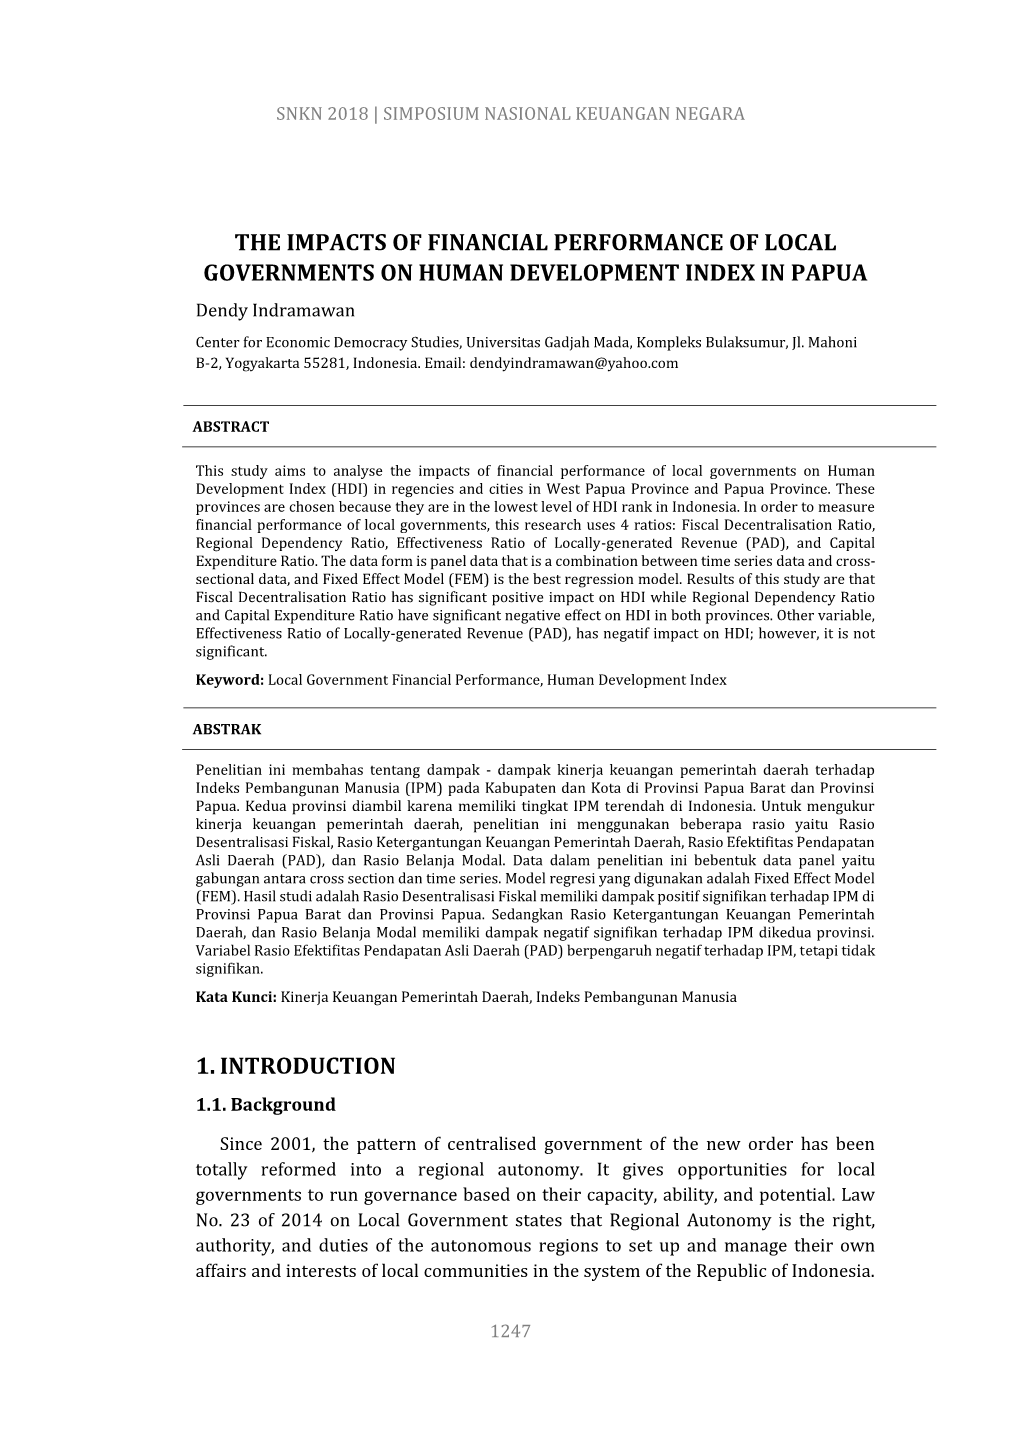 The Impacts of Financial Performance of Local